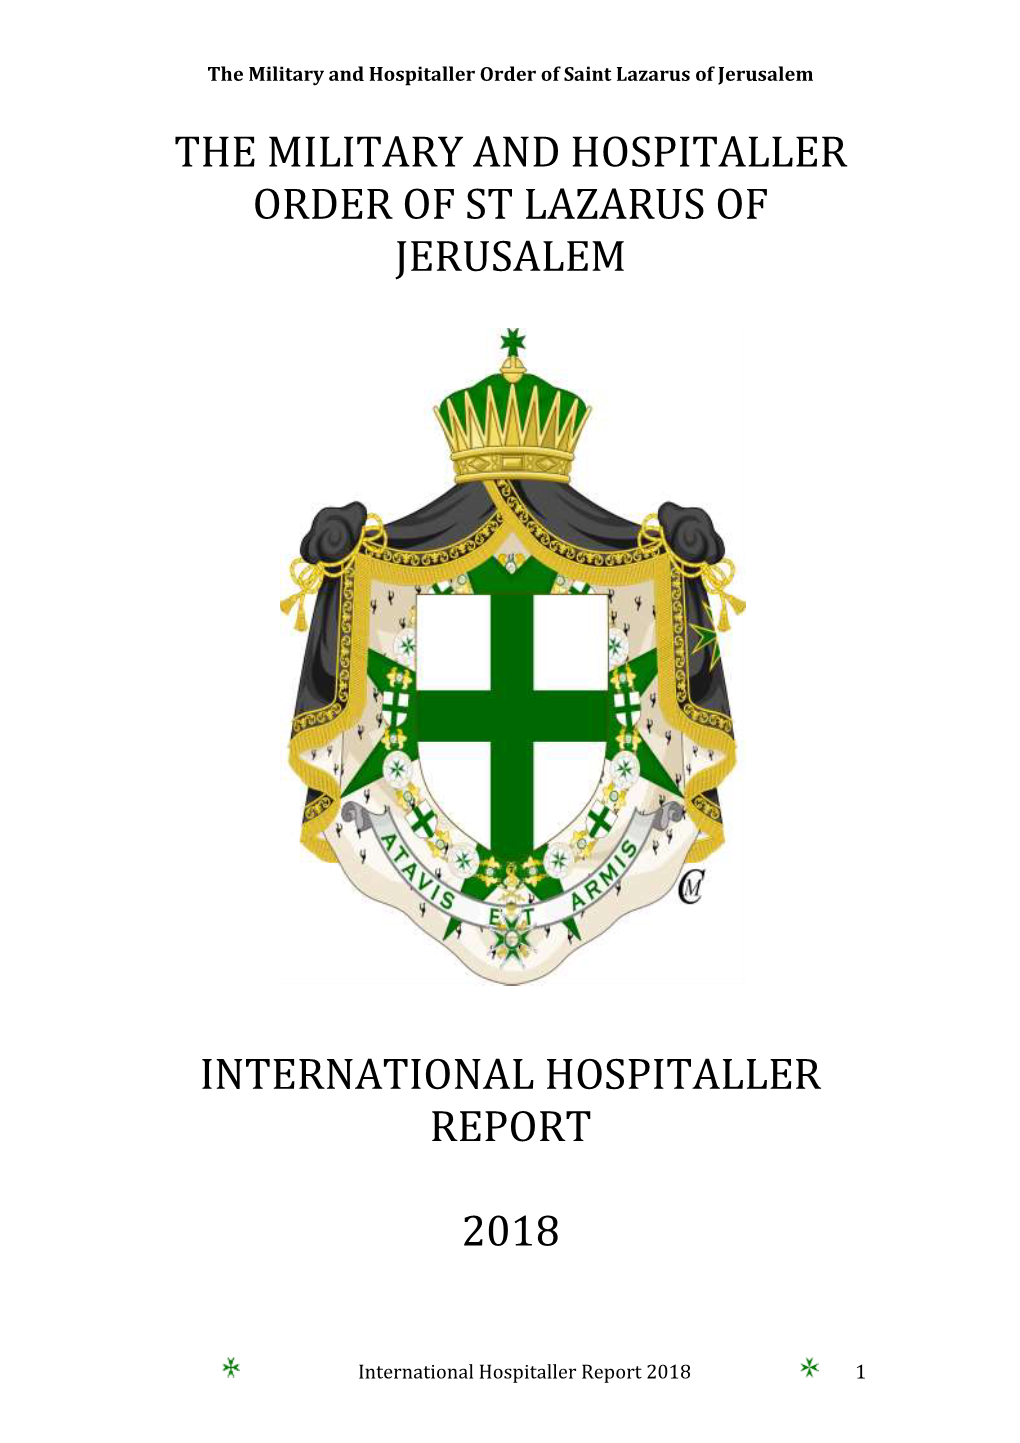 The Military and Hospitaller Order of St Lazarus of Jerusalem